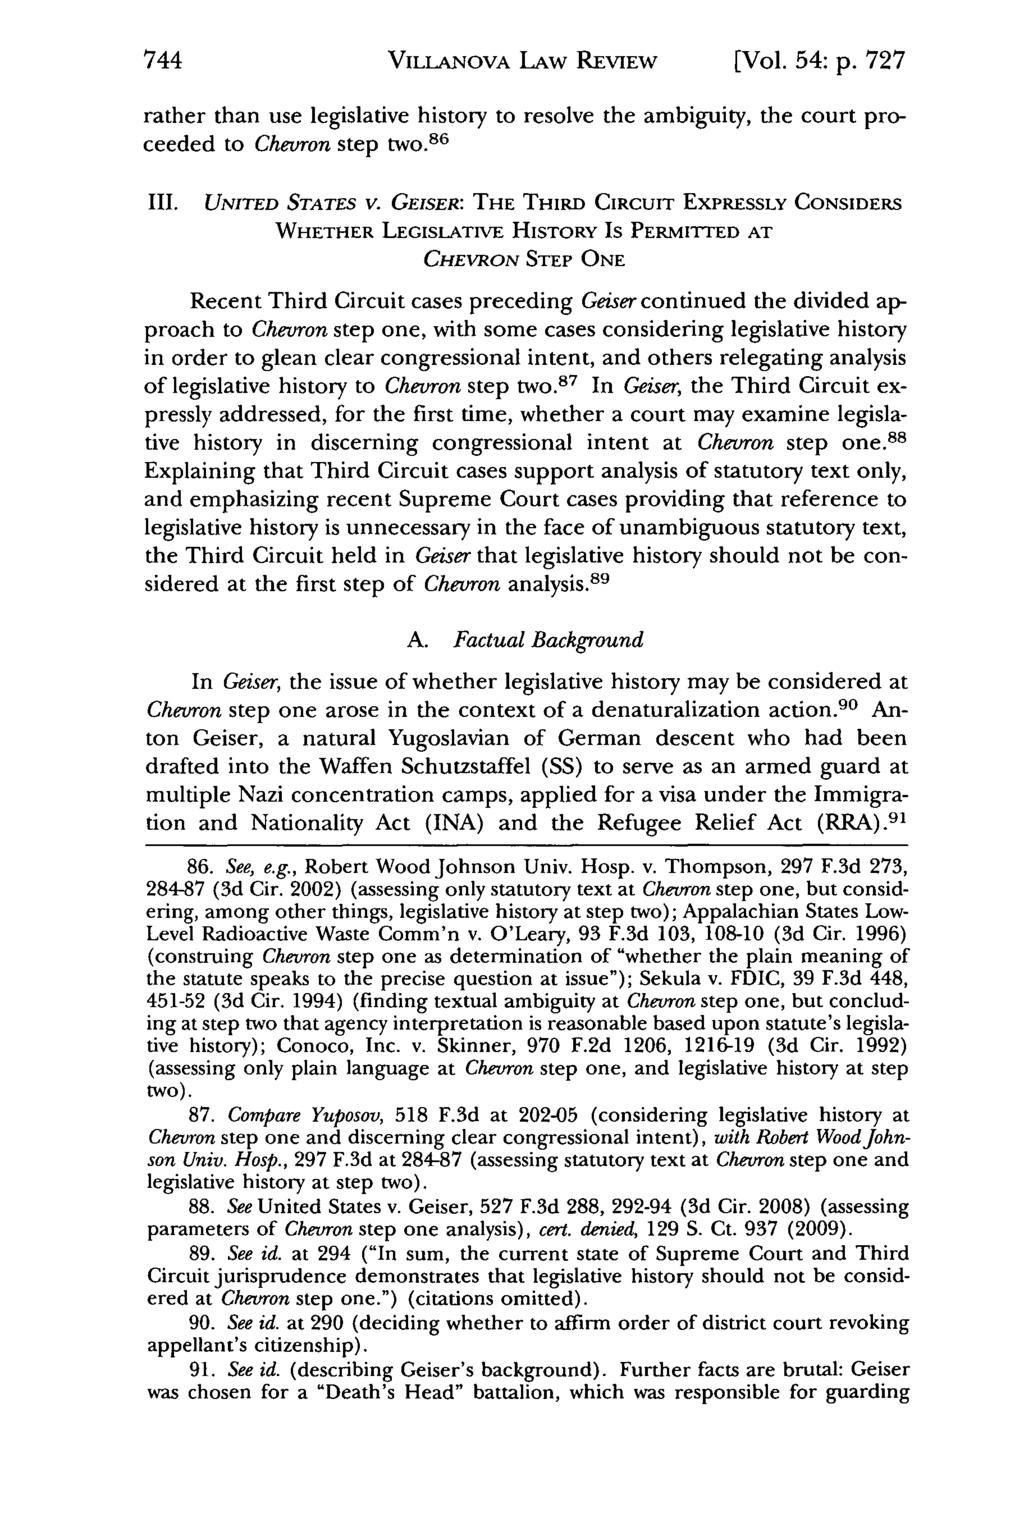 Villanova VILLANOVA Law Review, Vol. LAW 54, Iss. REVIEW 5 [2009], Art. 2 [Vol. 54: p. 727 rather than use legislative history to resolve the ambiguity, the court proceeded to Chevron step two.